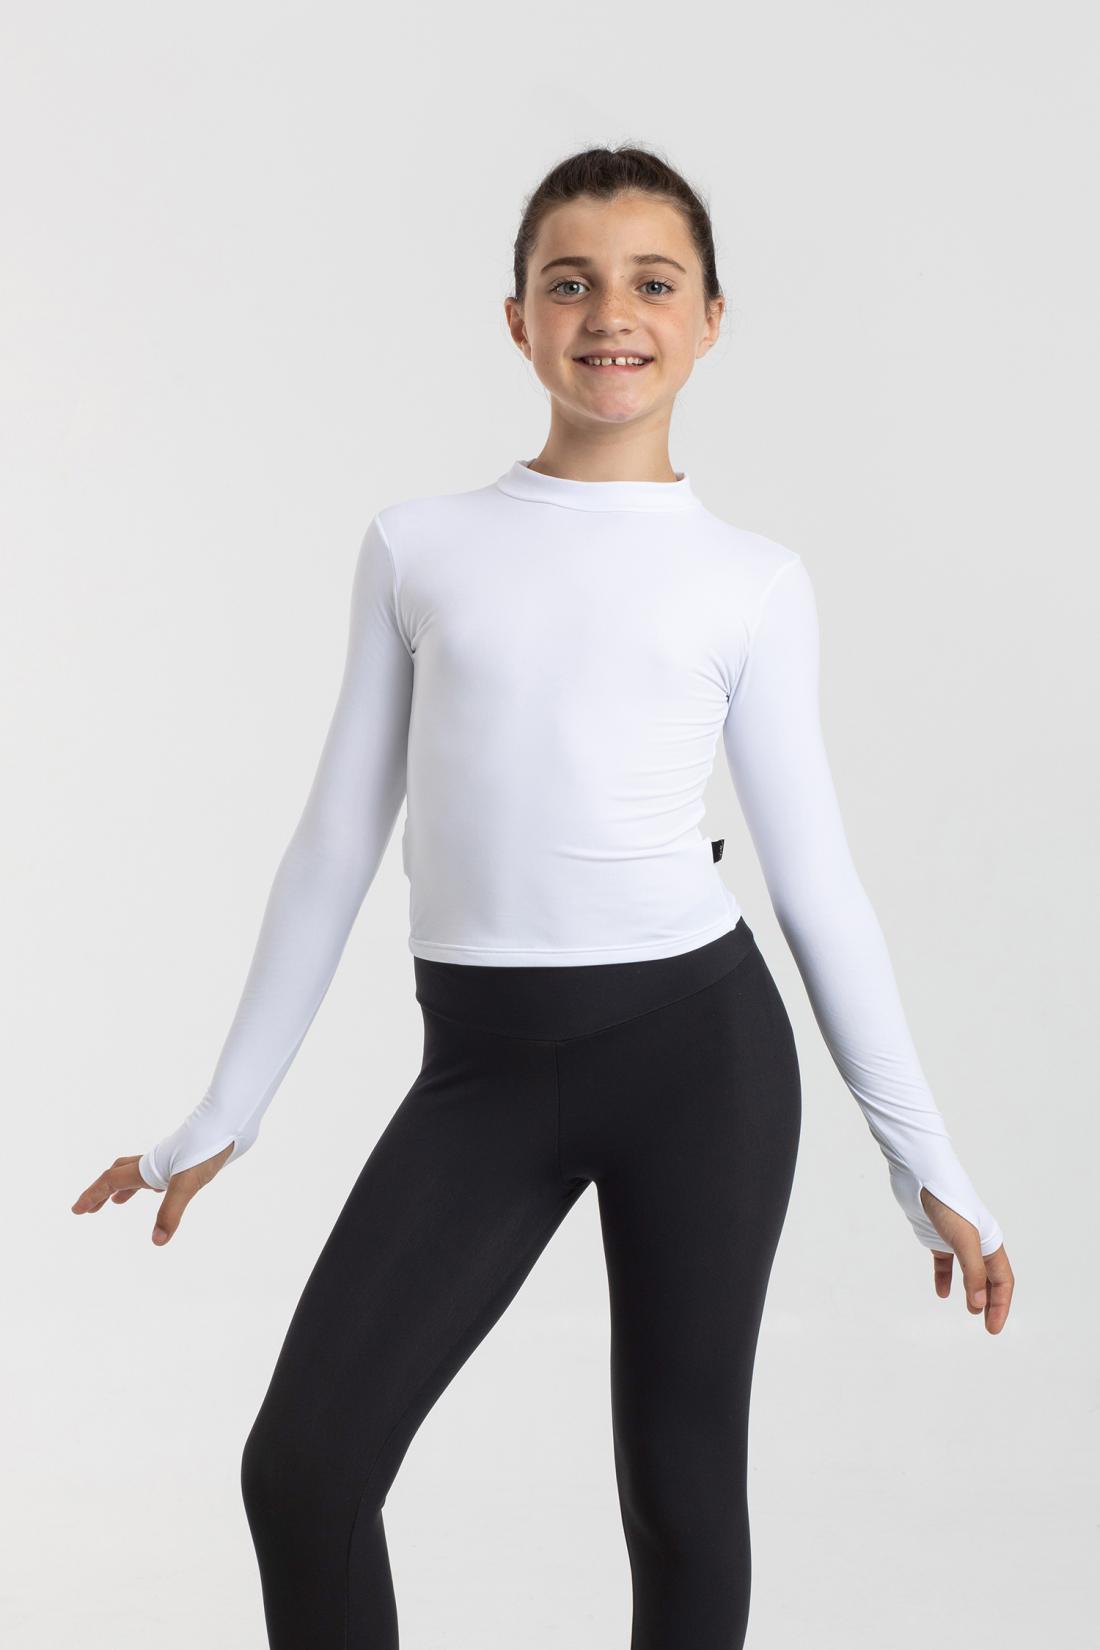 Cintia fitted long-sleeved turtleneck shirt with brushed fabric inside for Figure Skating Intermezzo